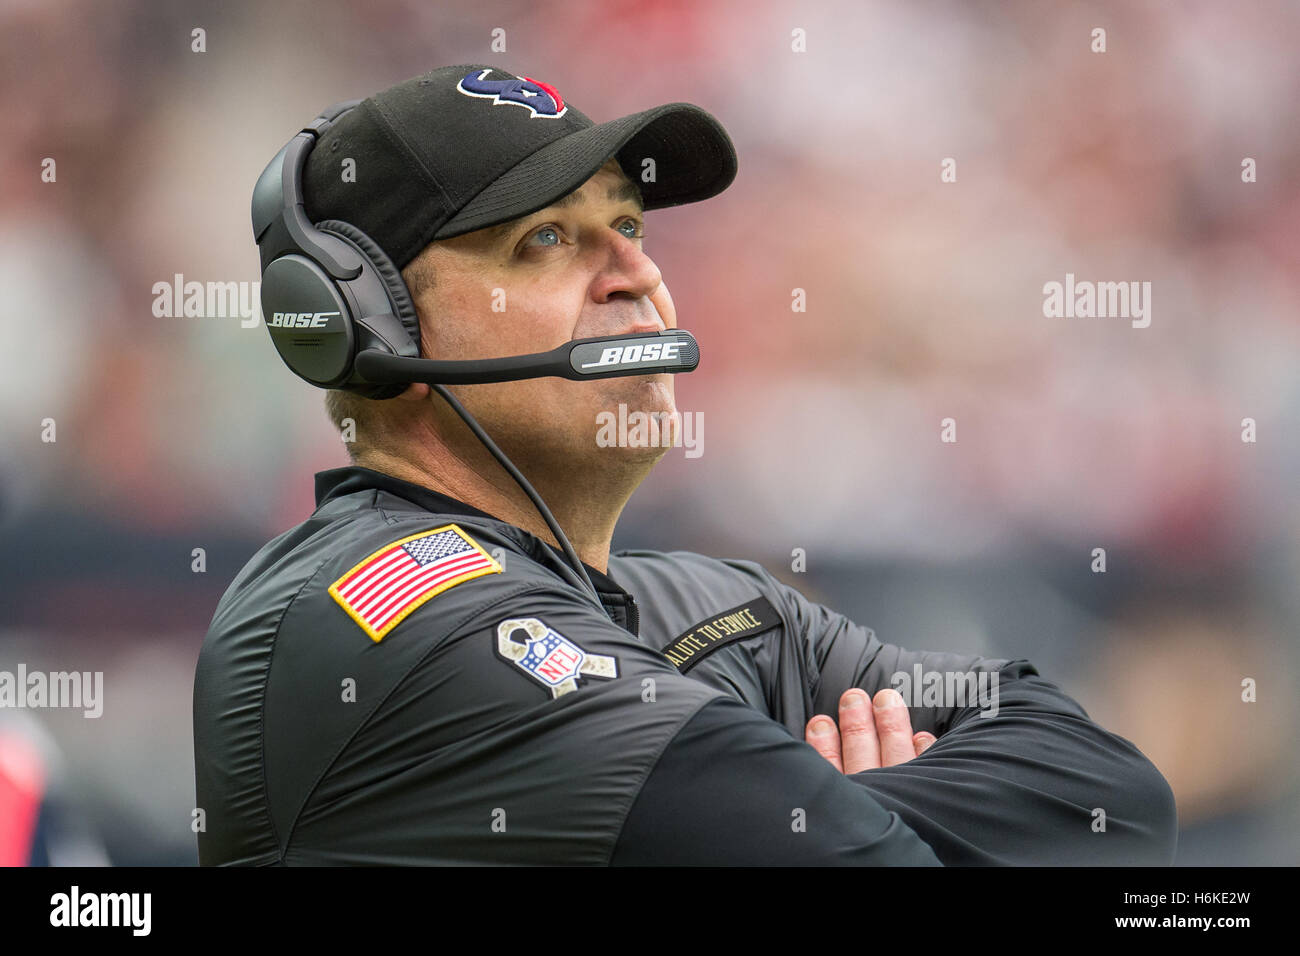 Houston, Texas, USA. 30th Oct, 2016. Houston Texans head coach Bill O'Brien watches during the 2nd quarter of an NFL game between the Houston Texans and the Detroit Lions at NRG Stadium in Houston, TX on October 30th, 2016. © Trask Smith/ZUMA Wire/Alamy Live News Stock Photo